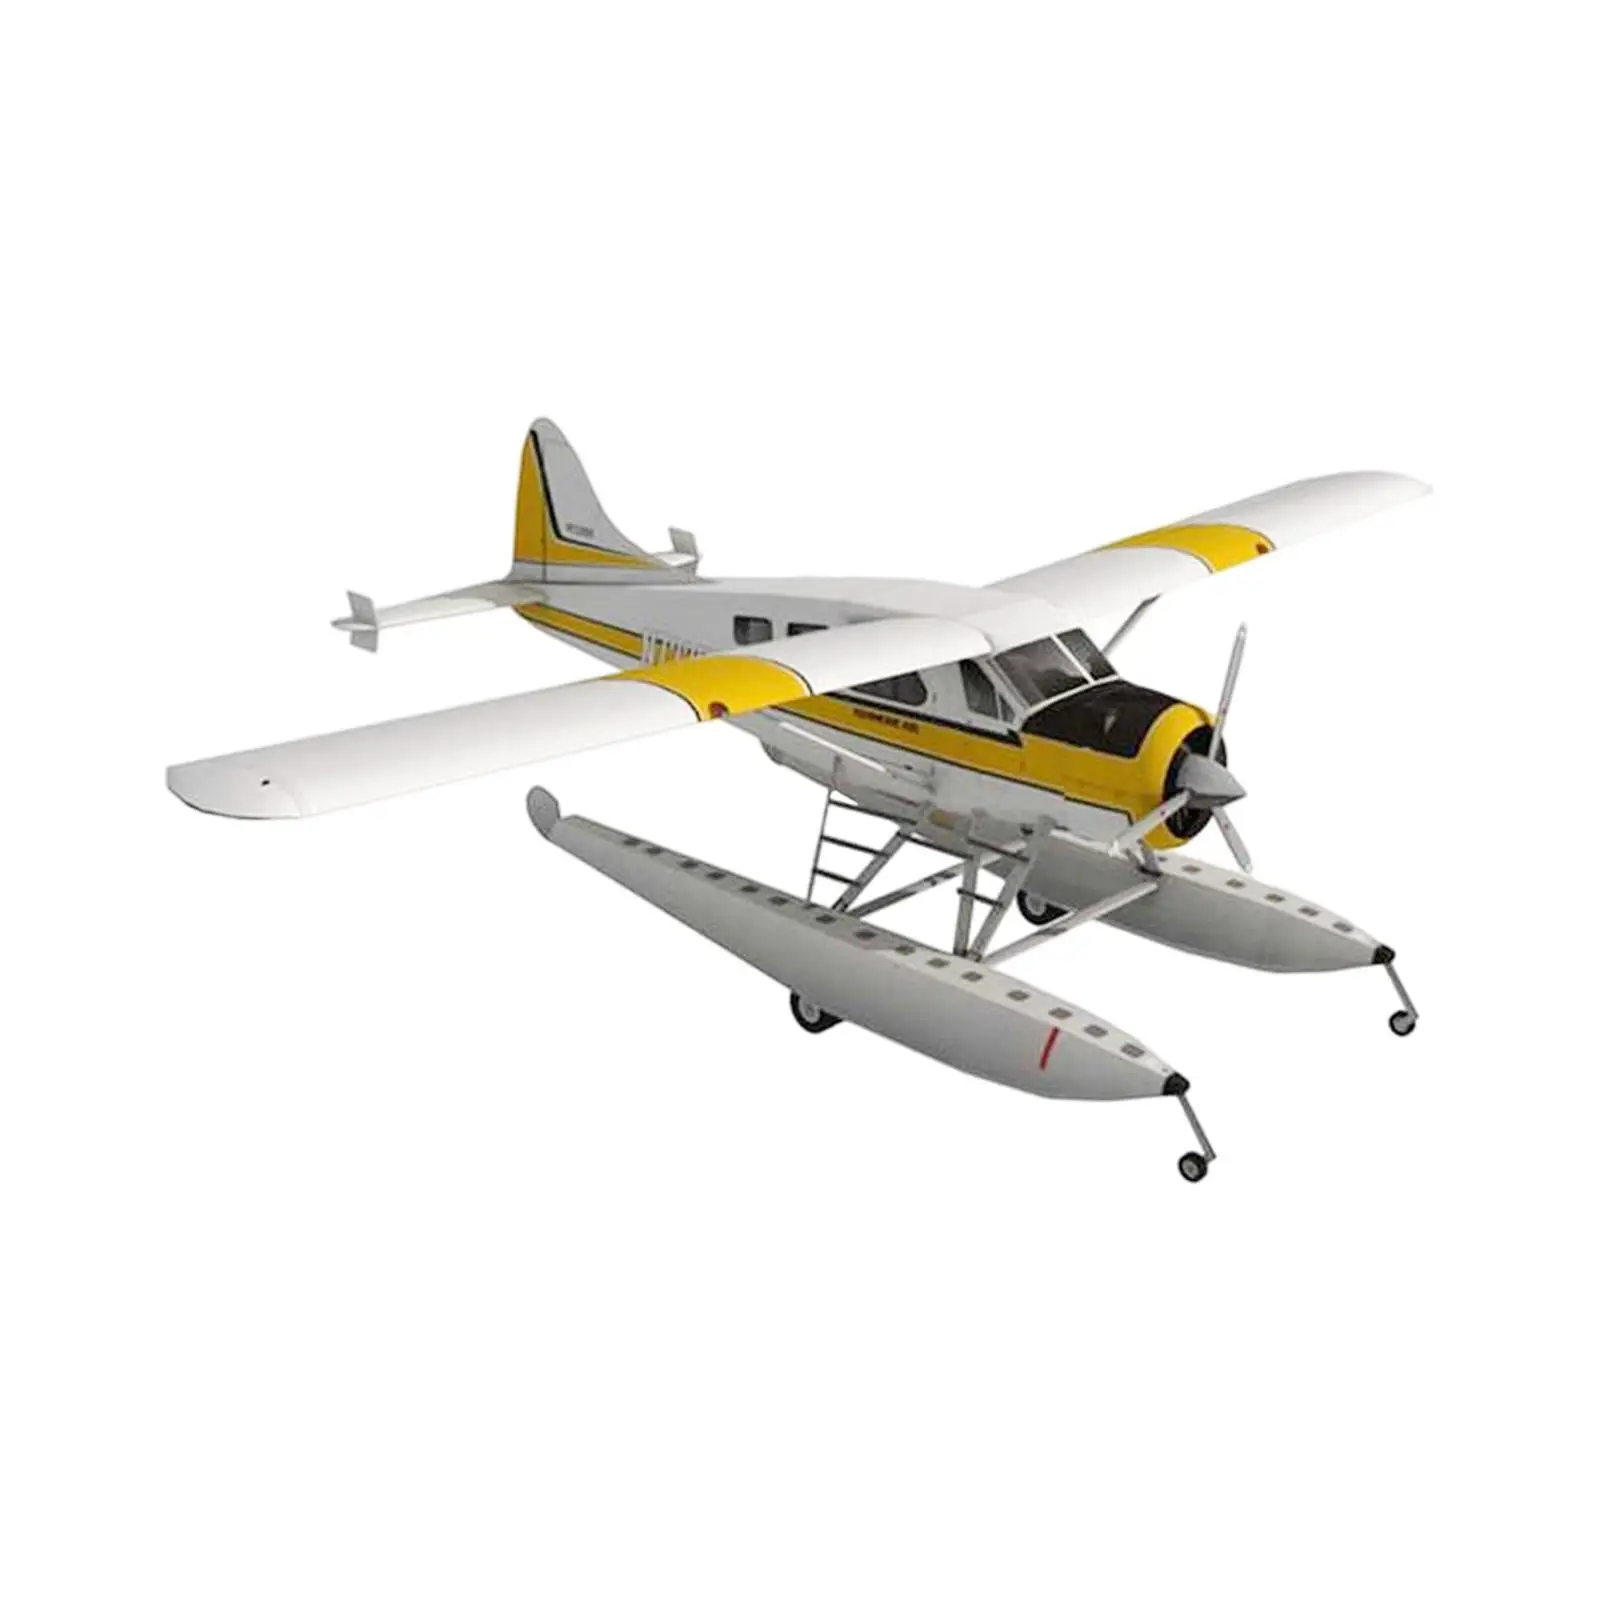 Water Plane Handmade 1:32 Scale Float Seaplane Model for Adults Kids Gifts